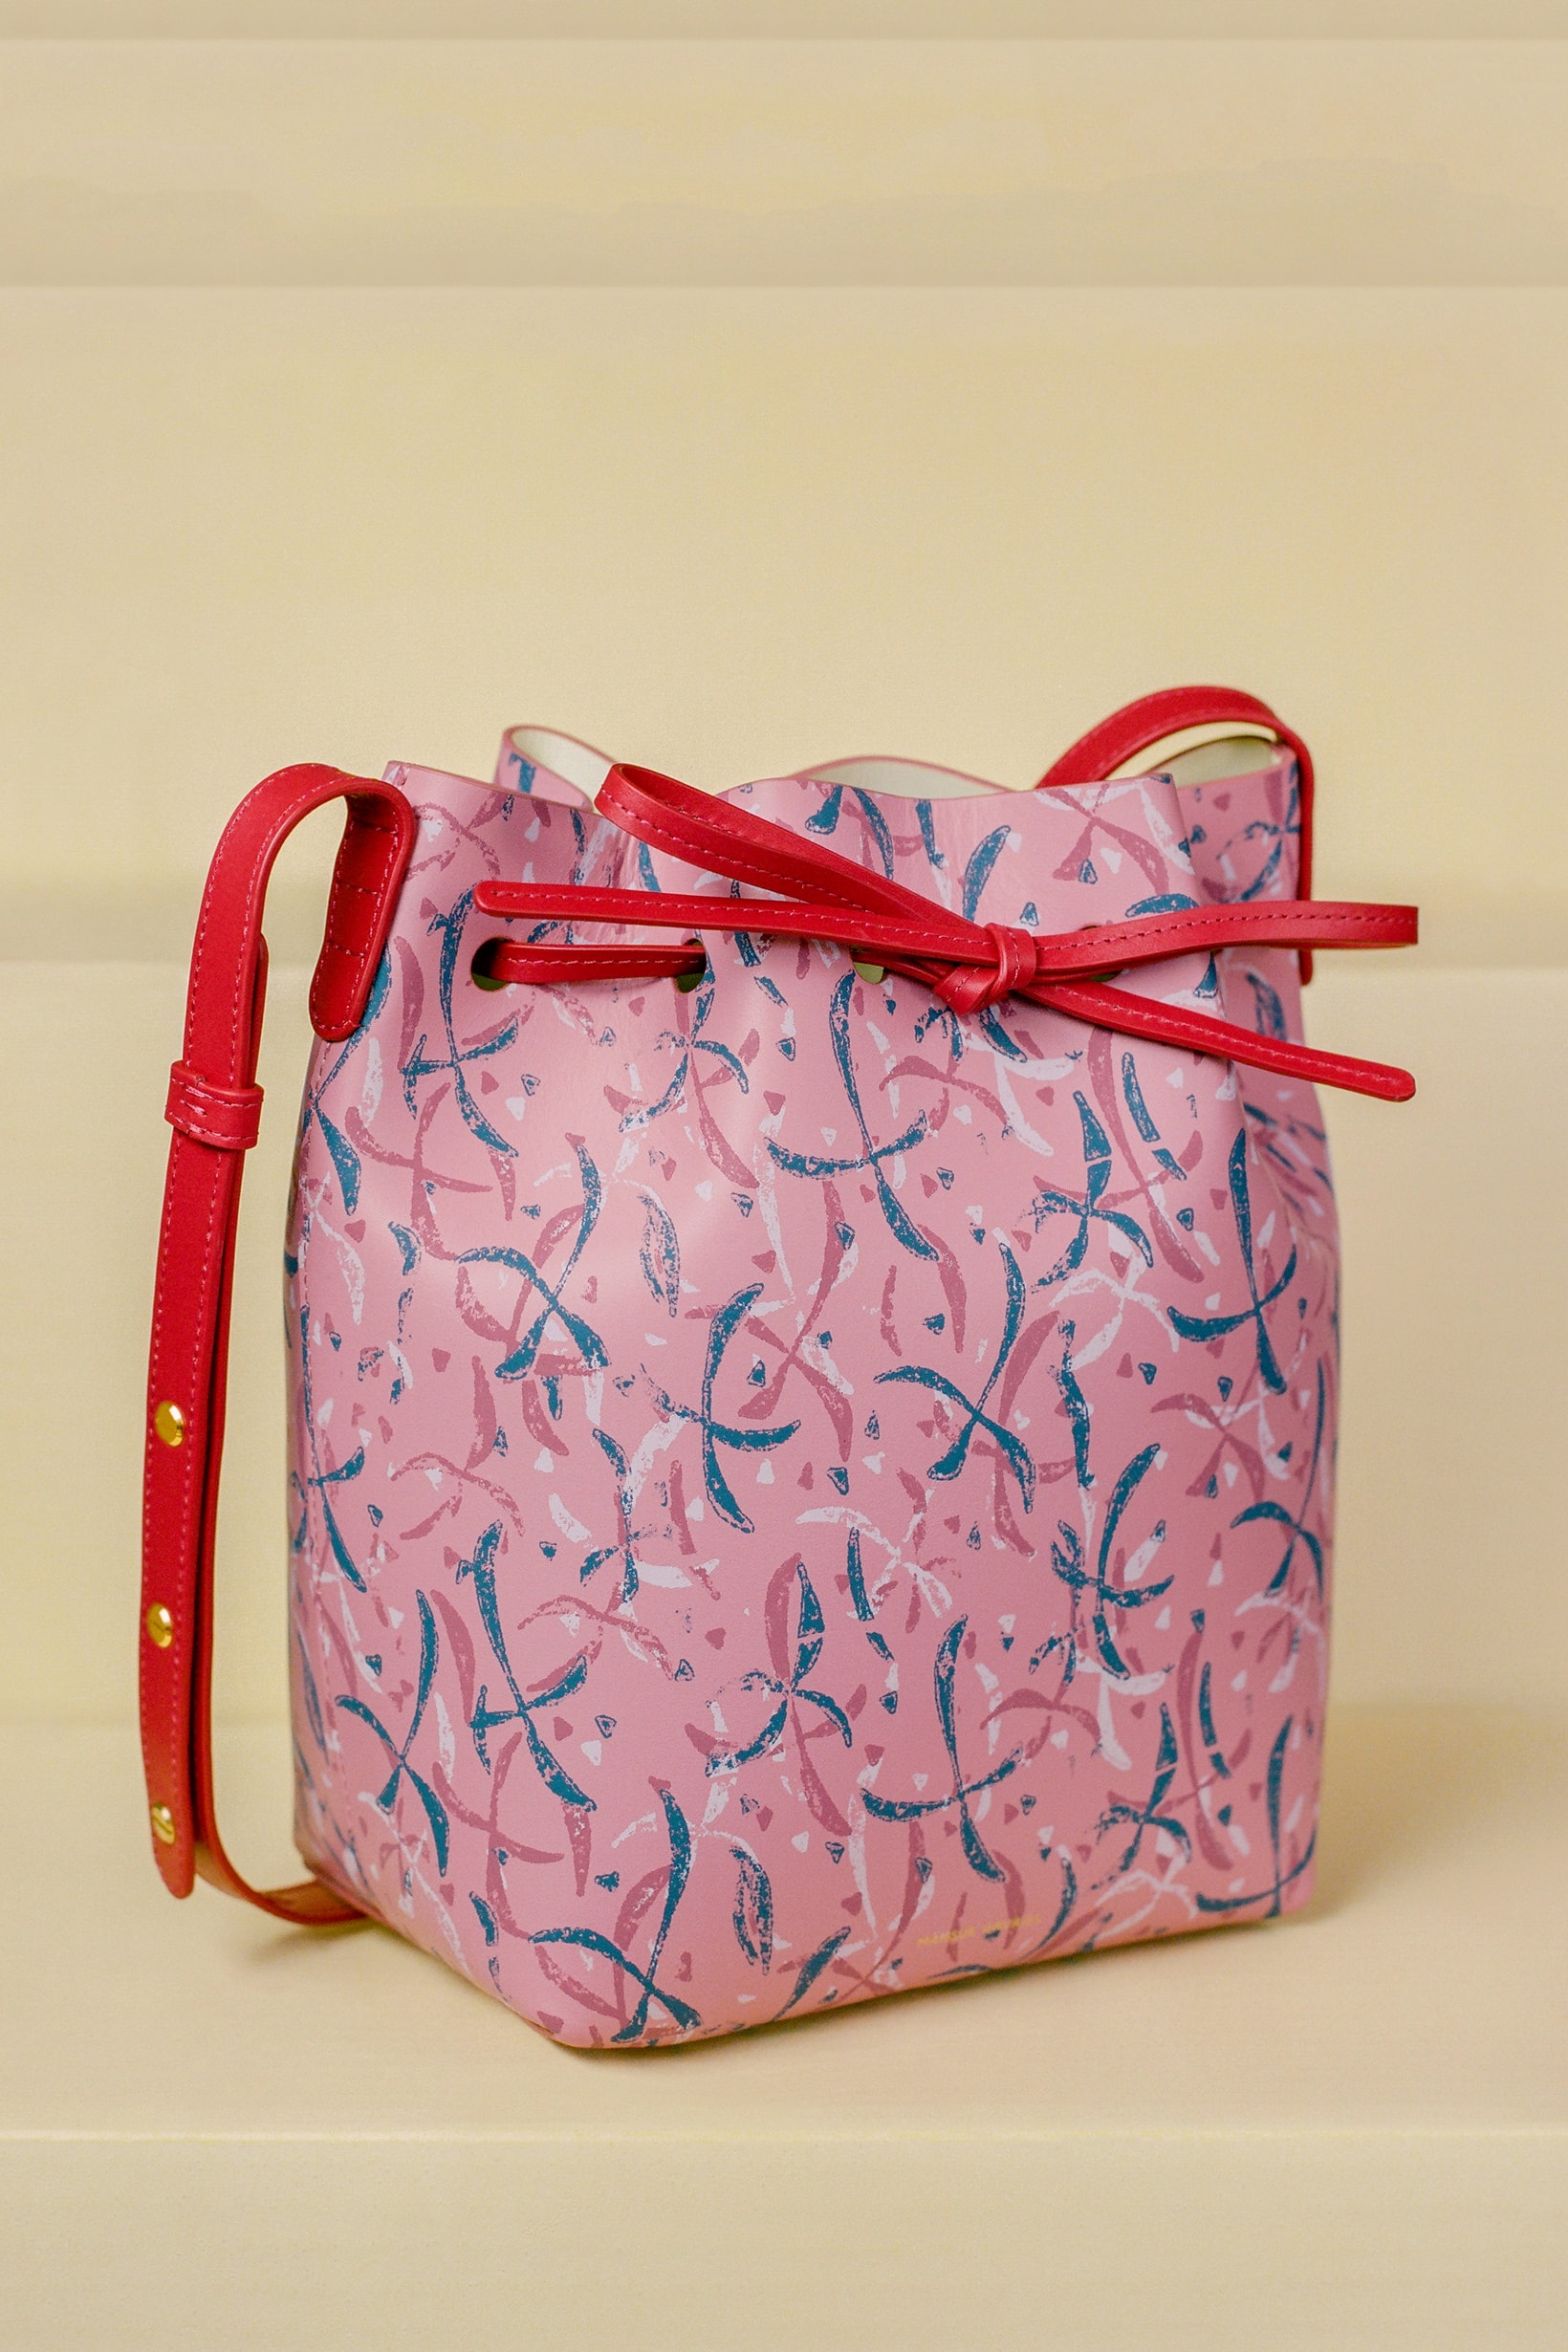 Marc Camille Chaimowicz x Mansur Gavriel Spring Summer 2019 Collection Mini Bucket Bag Pink Red